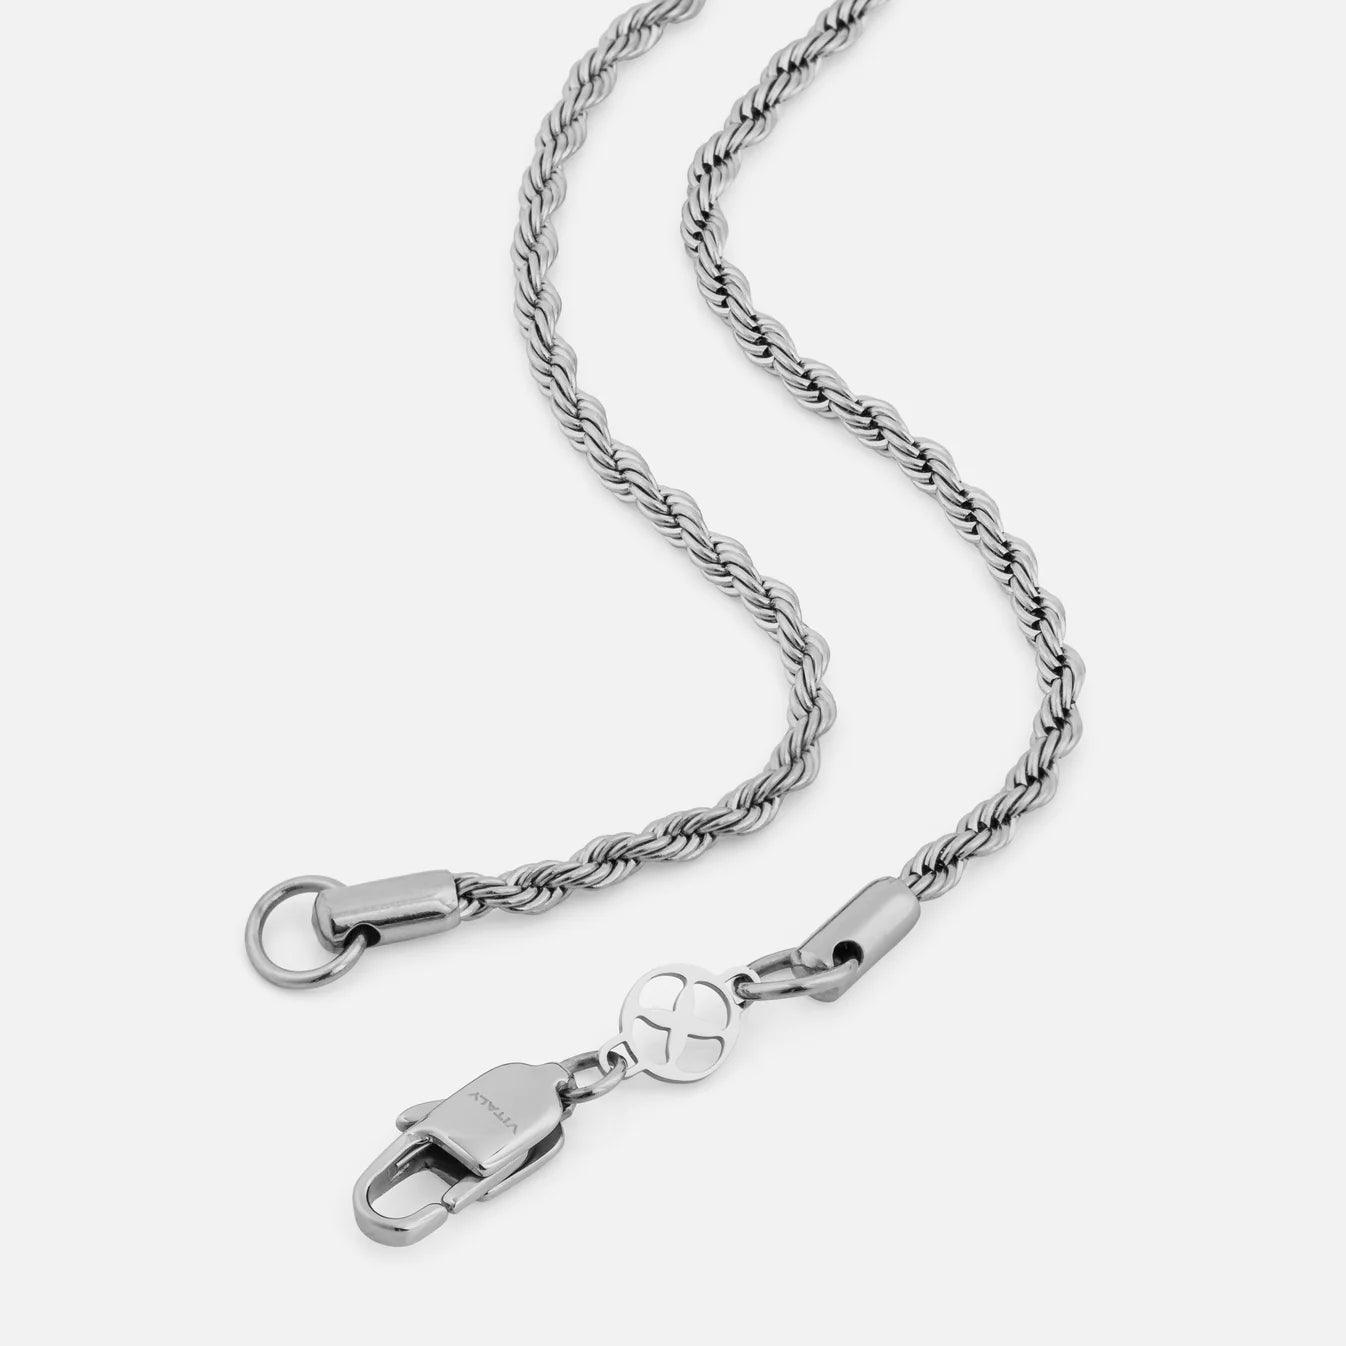 VITALY Rope Chain Stainless Steel Necklace - Jewelry